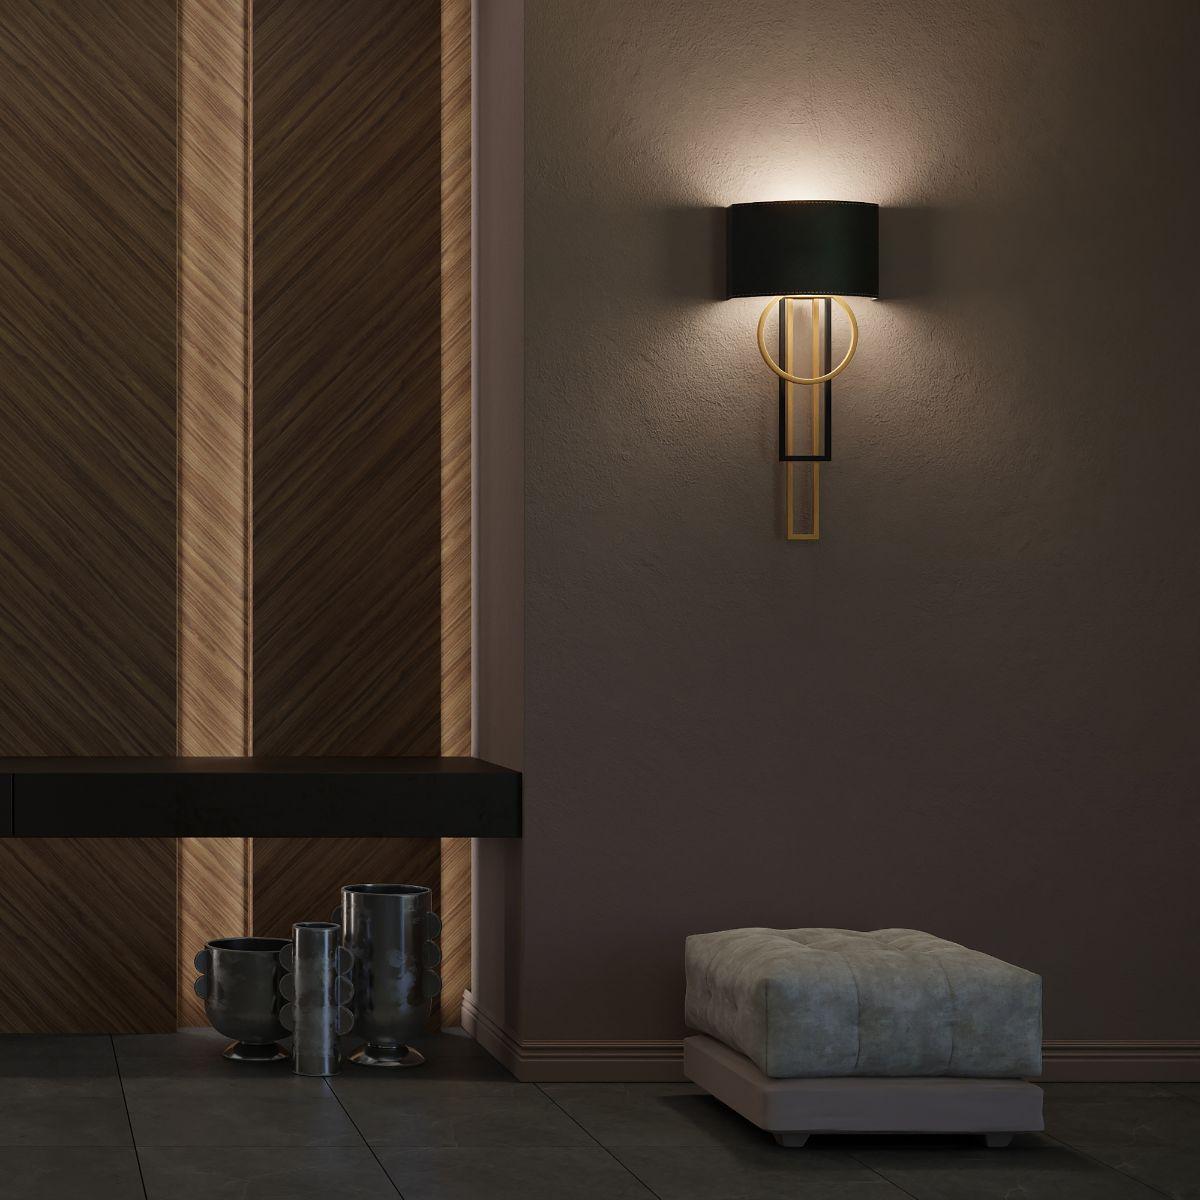 Sartre 32 in. LED Wall Sconce Brass finish